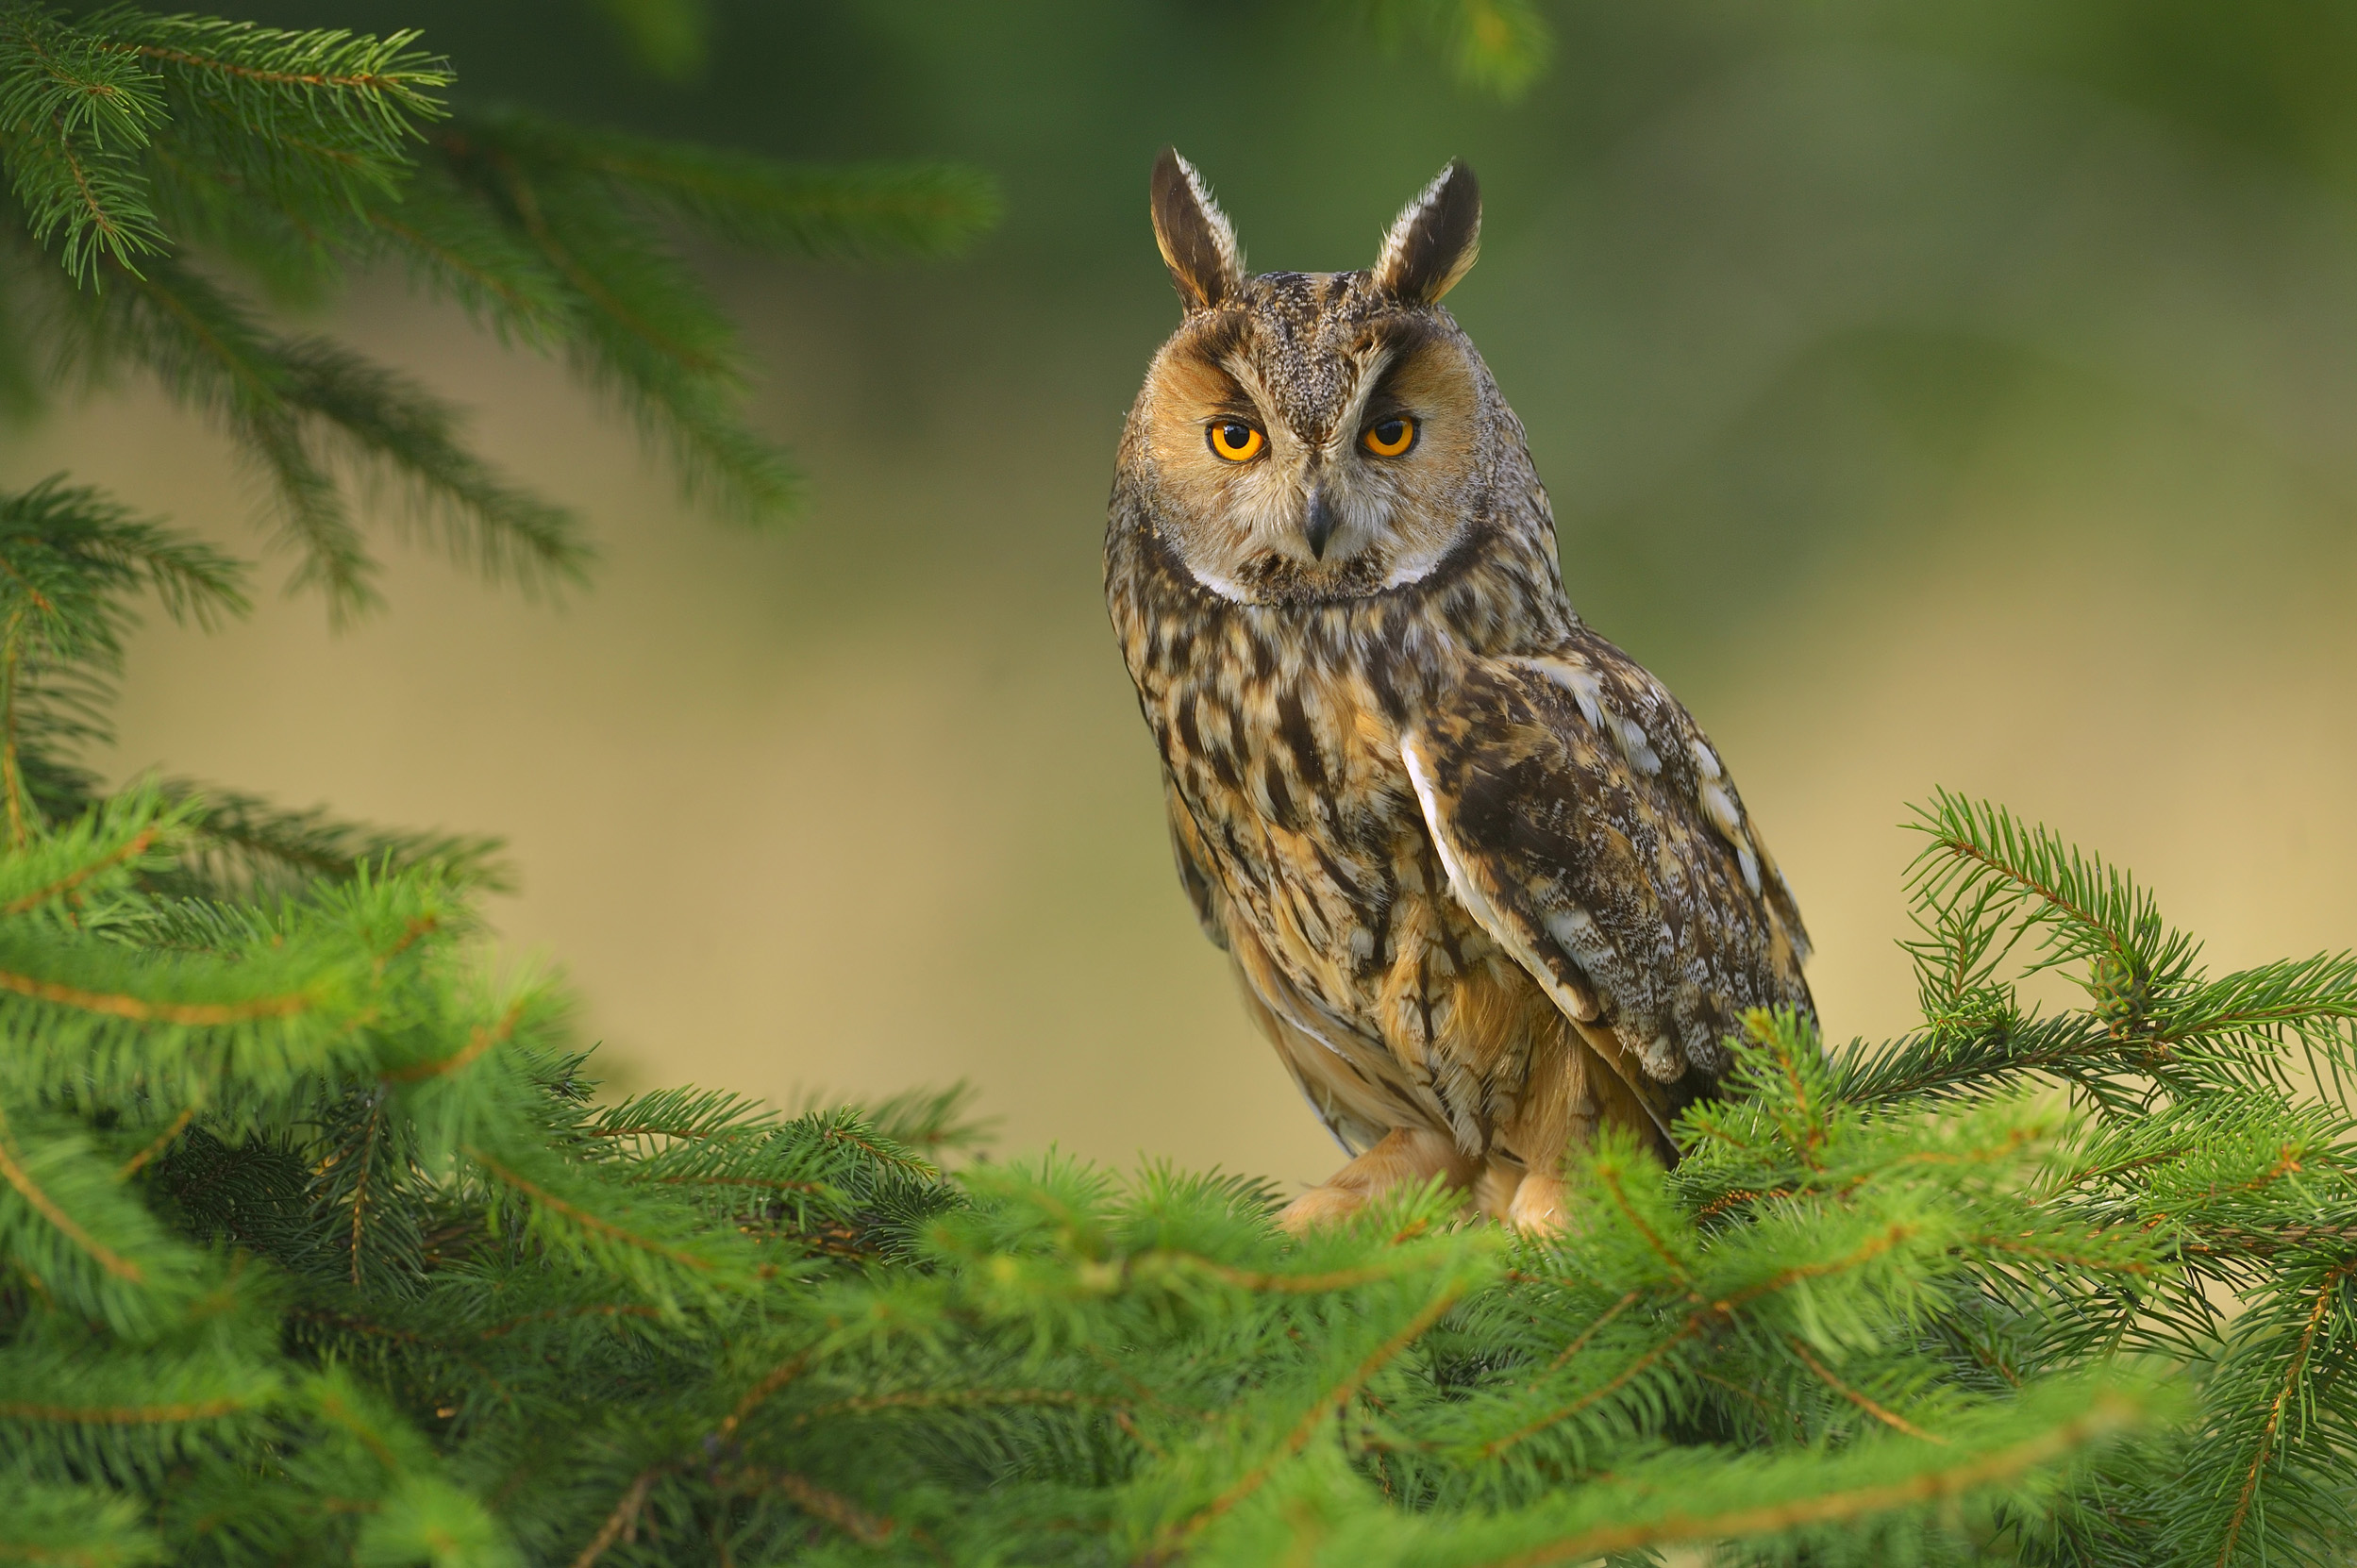 Long Eared Owl perched in a tree.